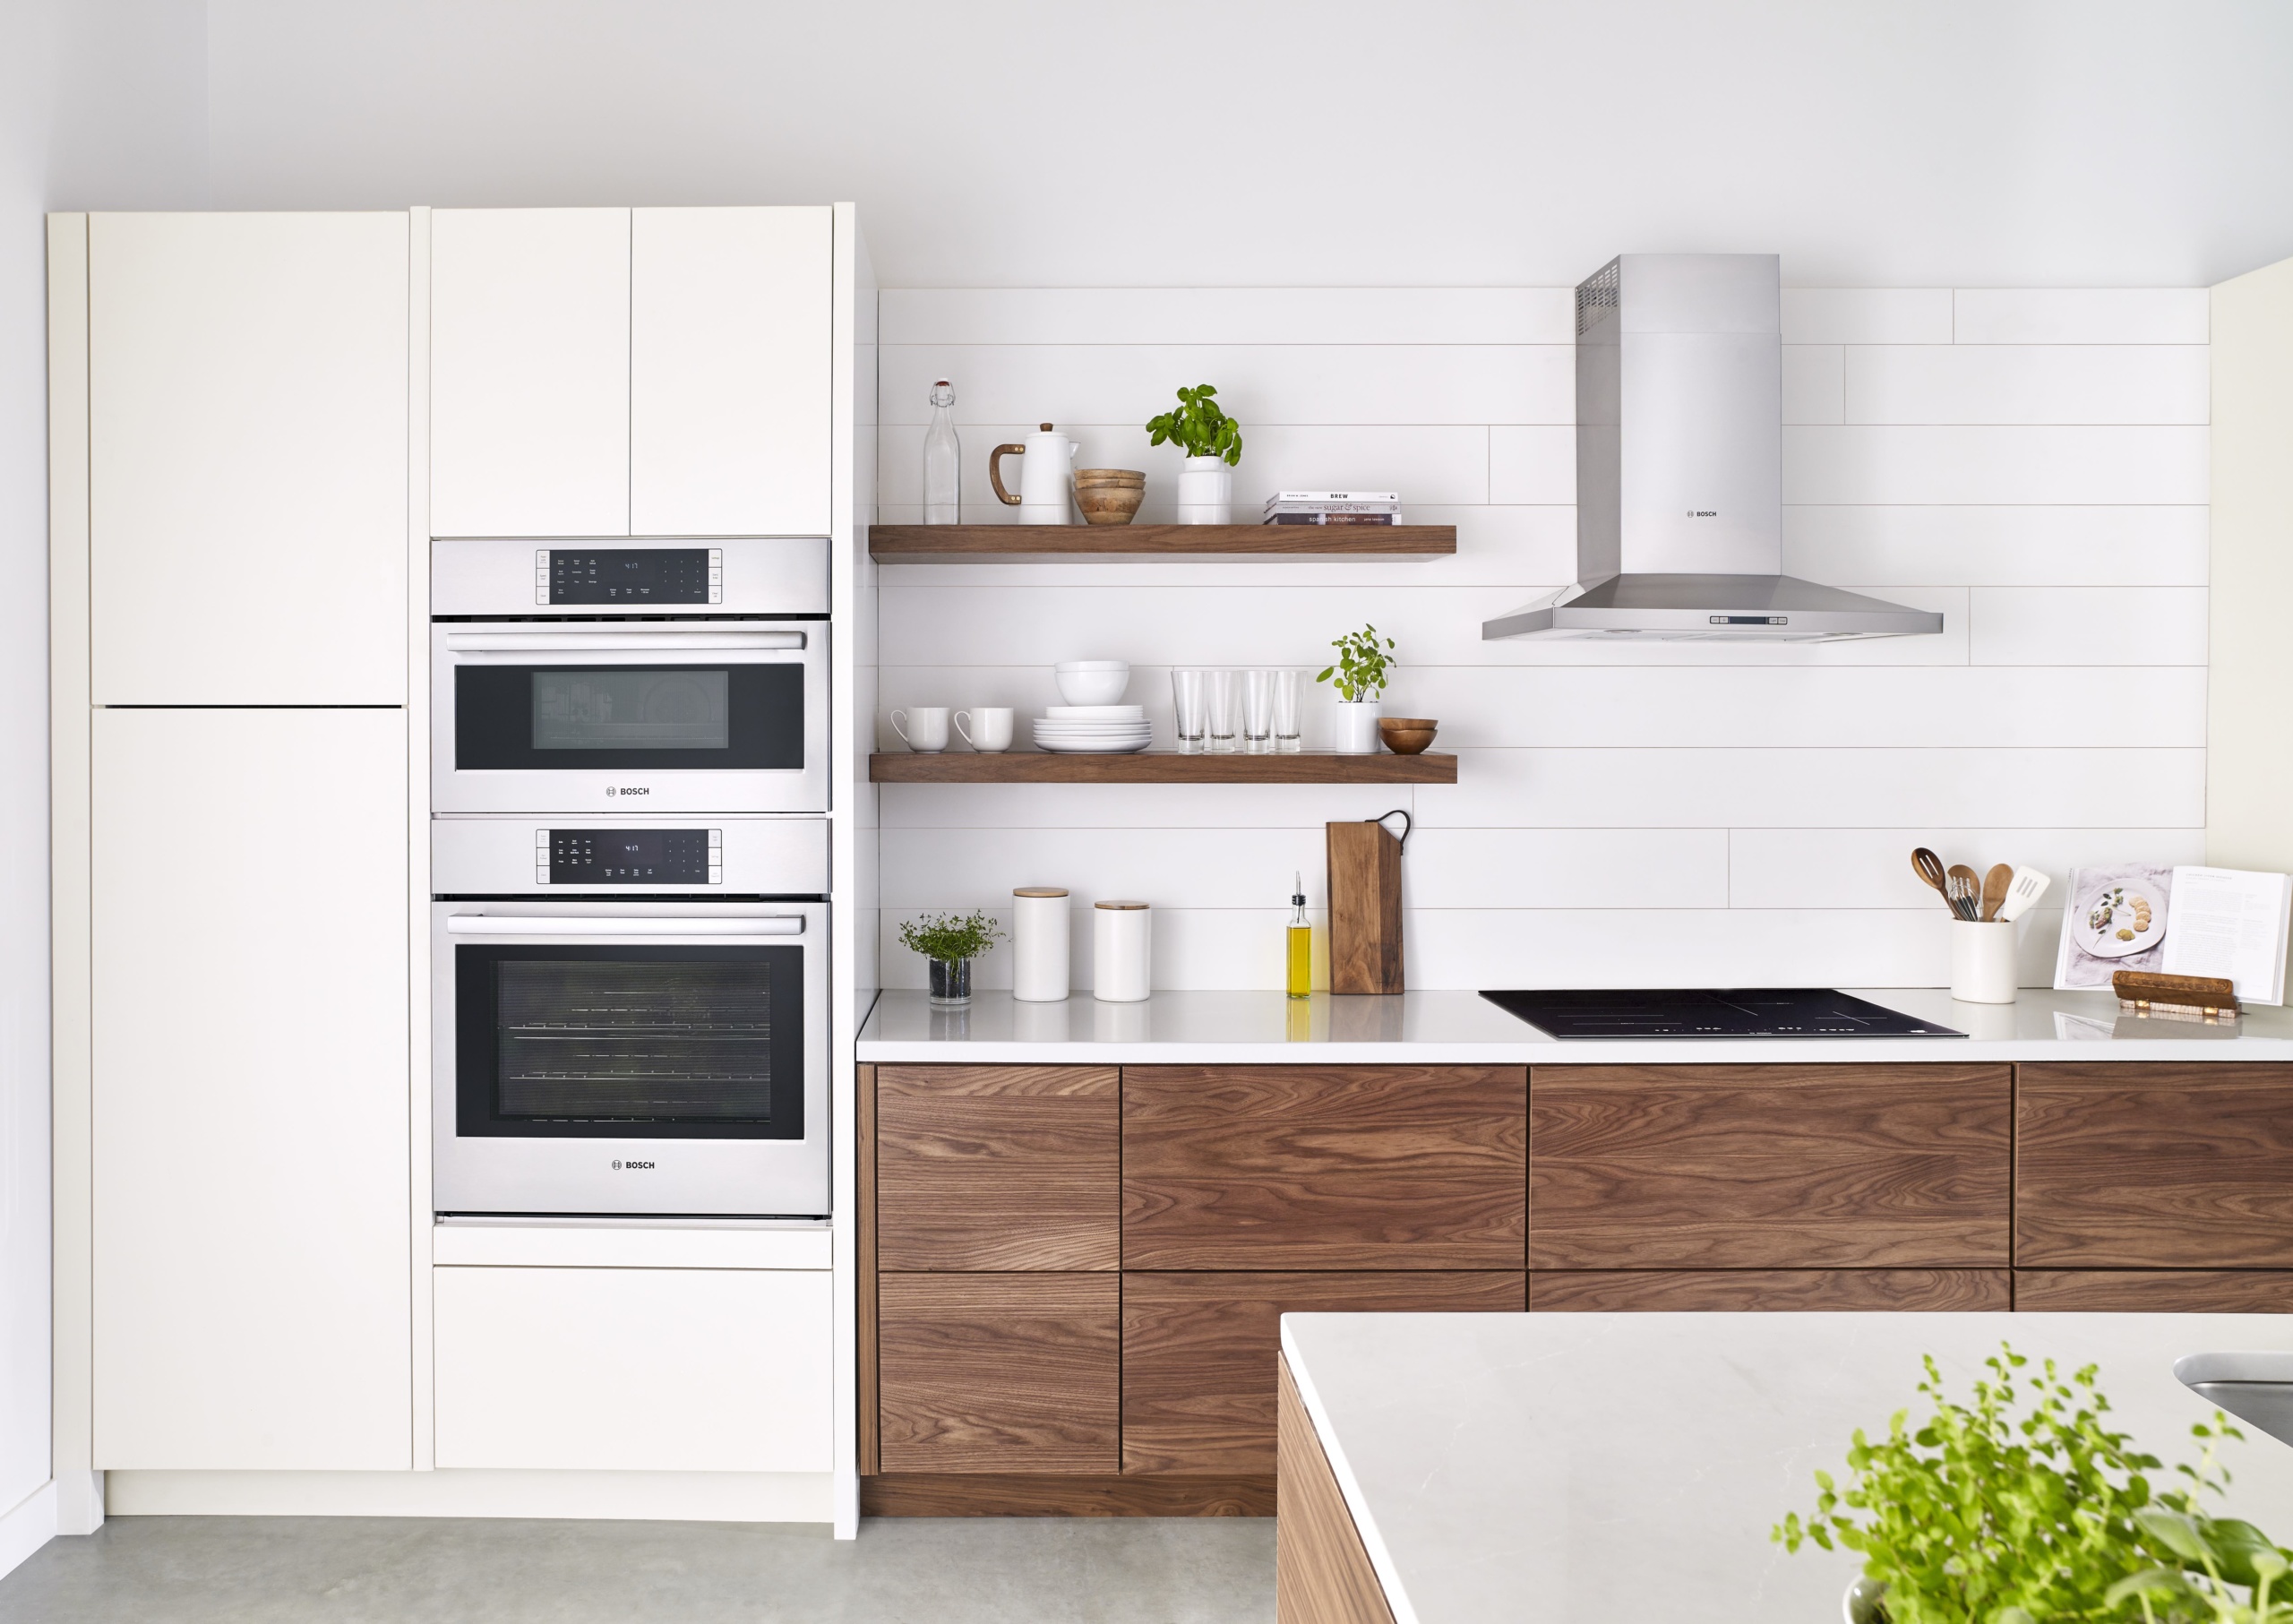 Interior of a kitchen with new appliances and wood shelve